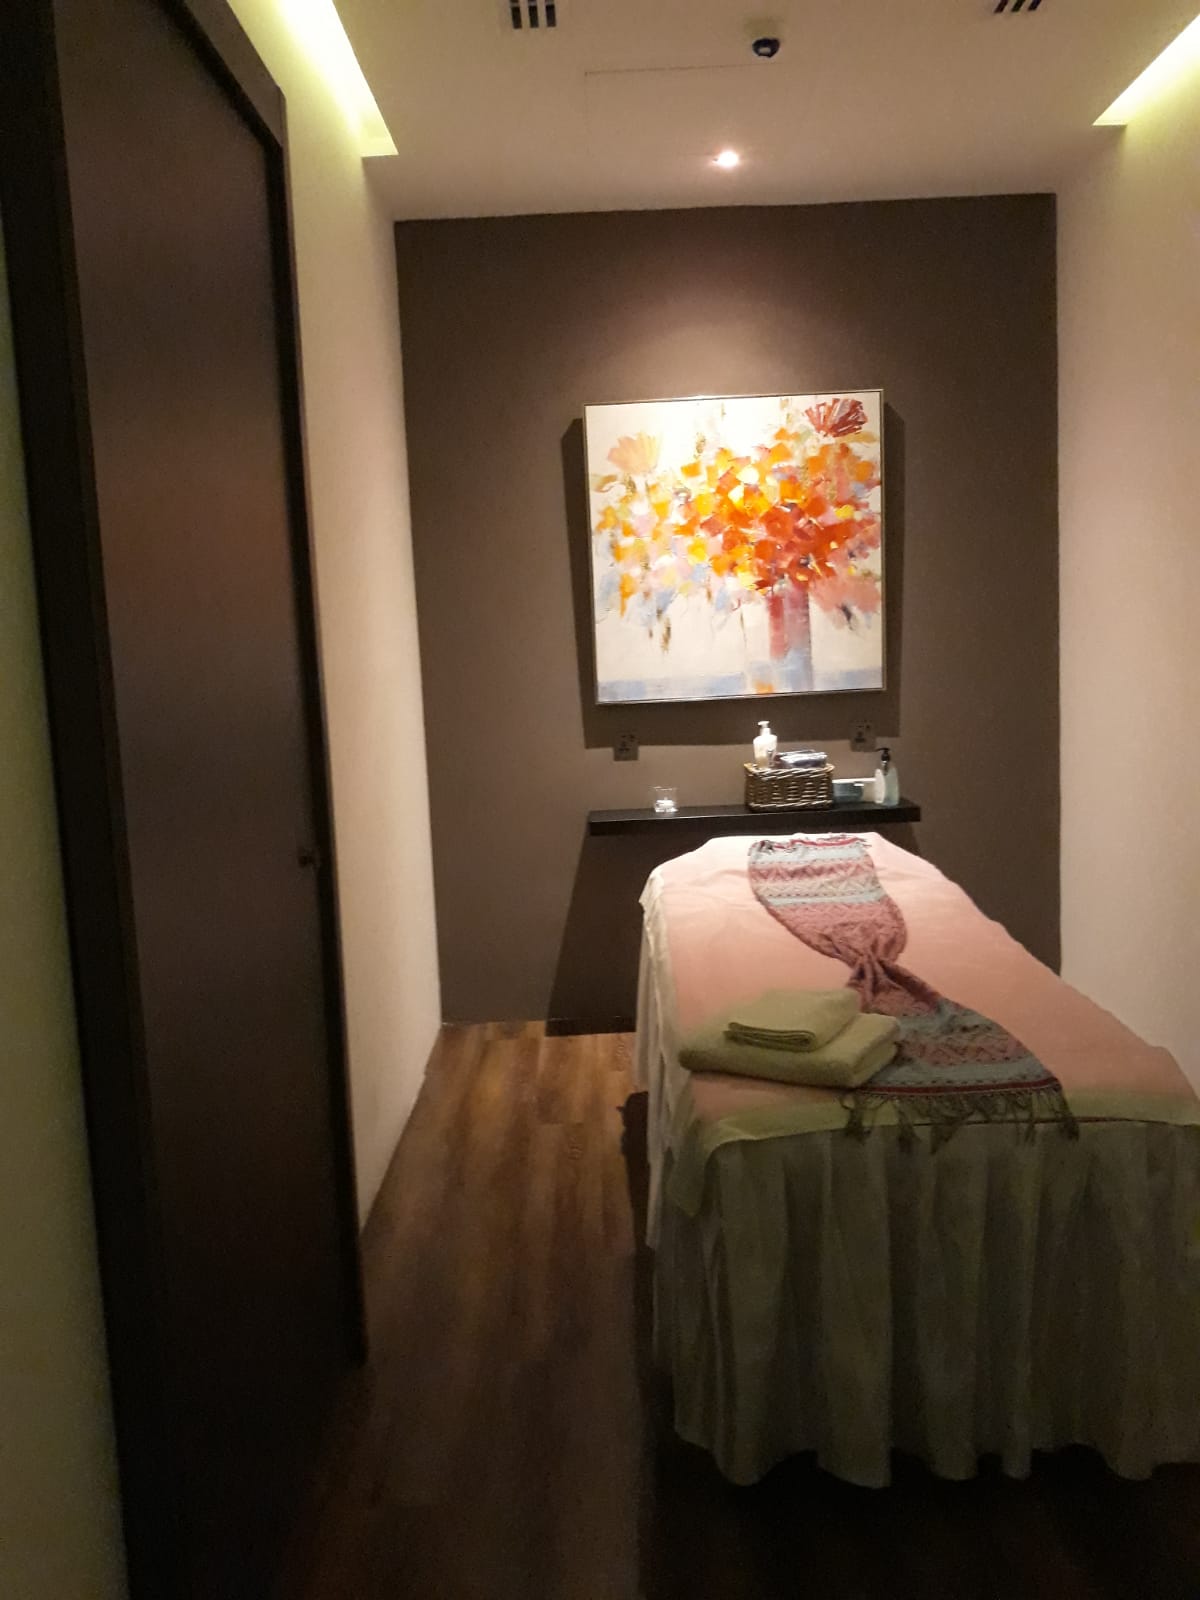 Photograph of massage therapy room with high massage bed